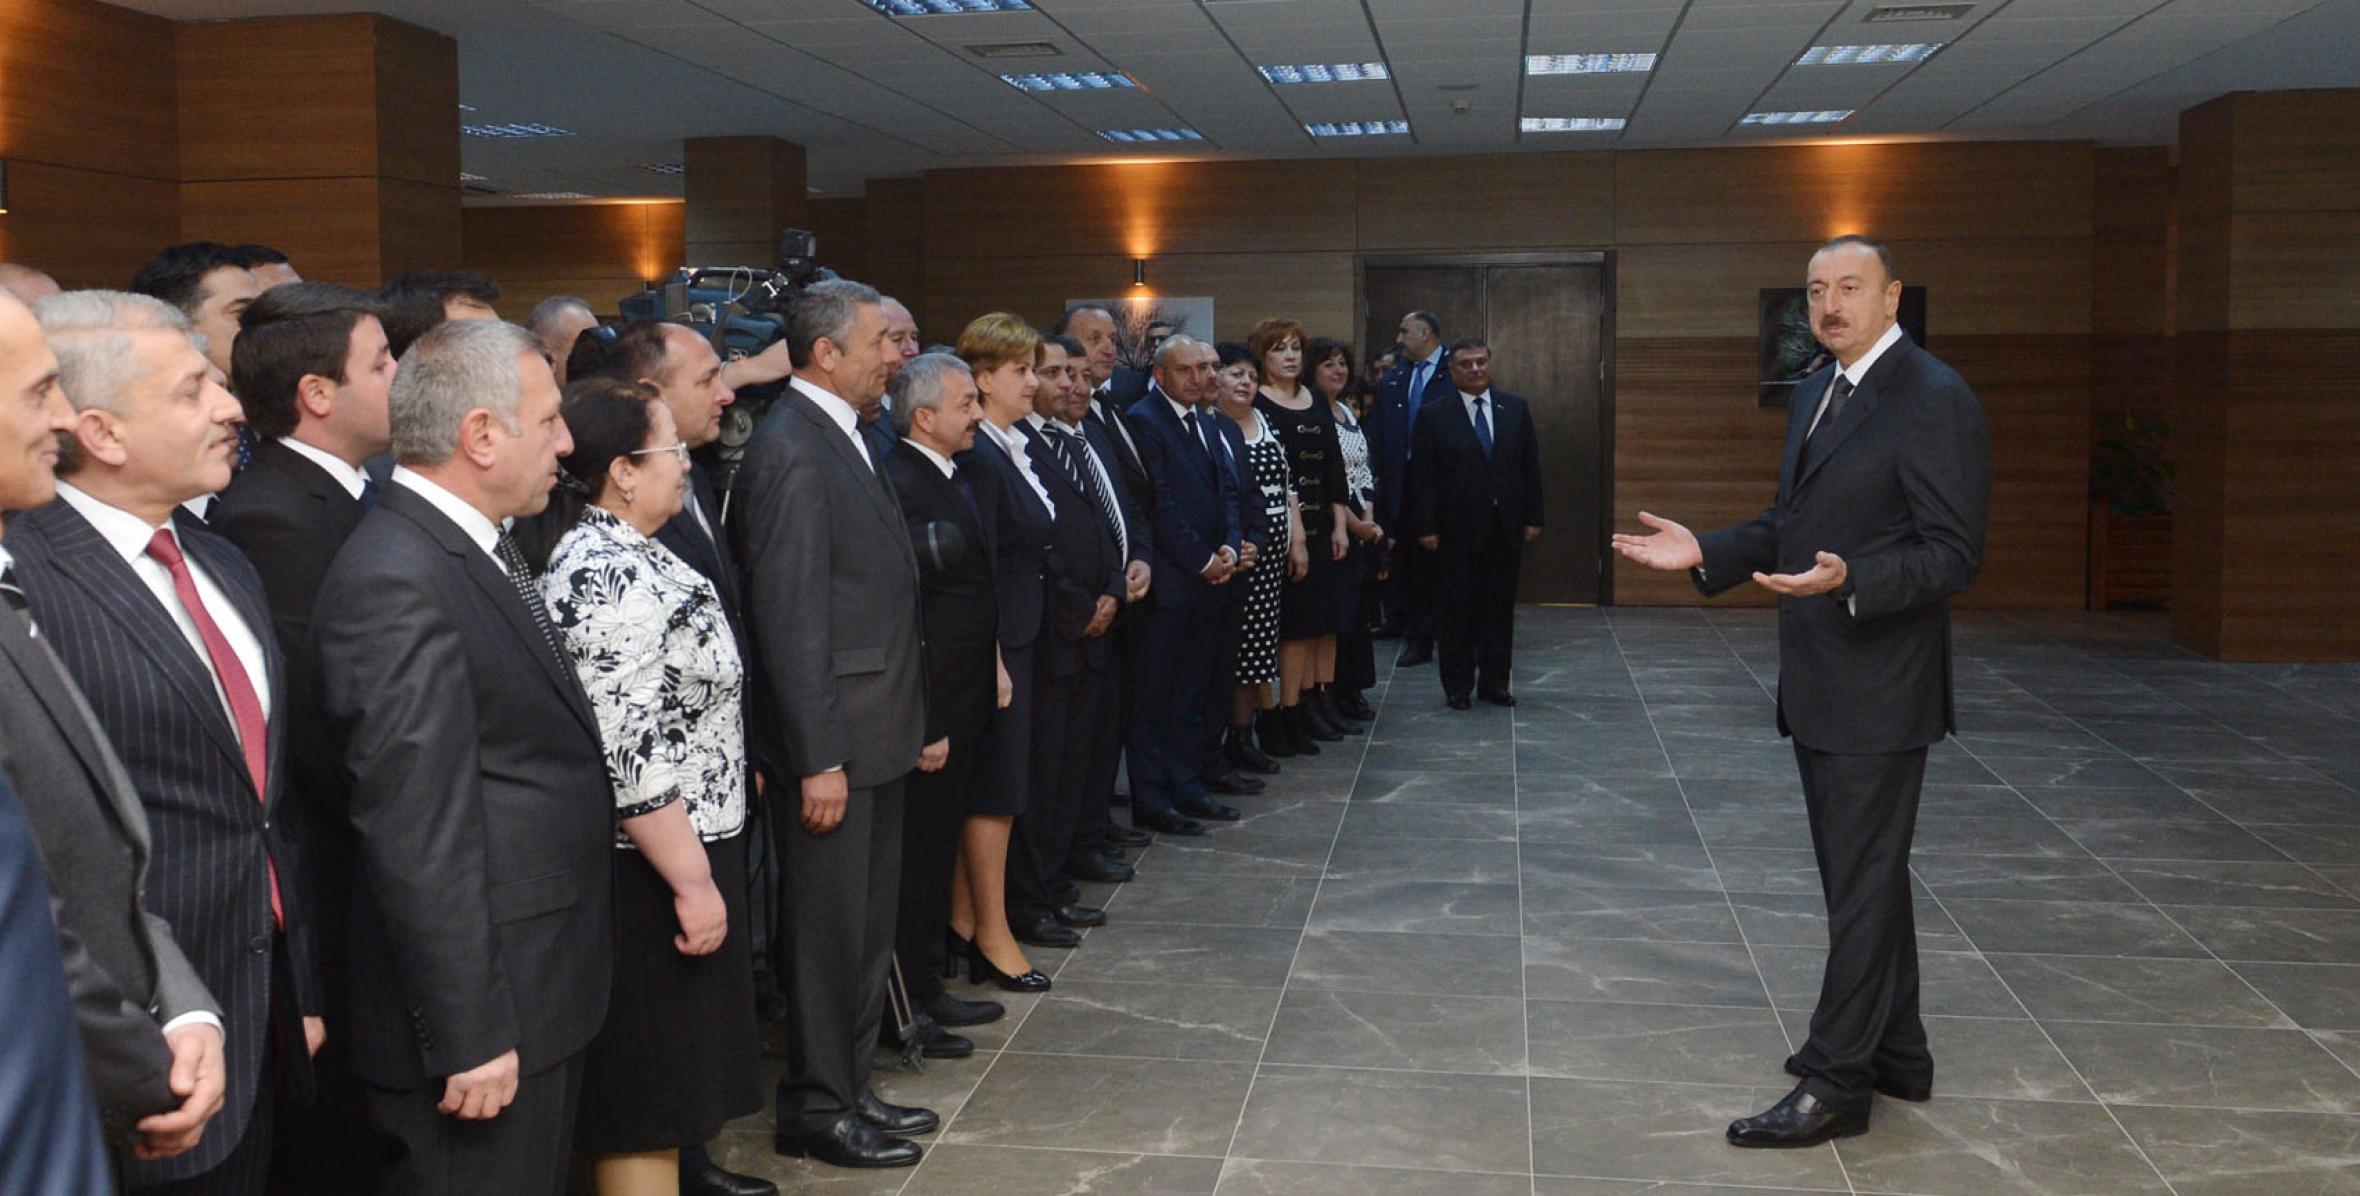 Speech by Ilham Aliyev at the opening of the Goygol Olympic Sports Center